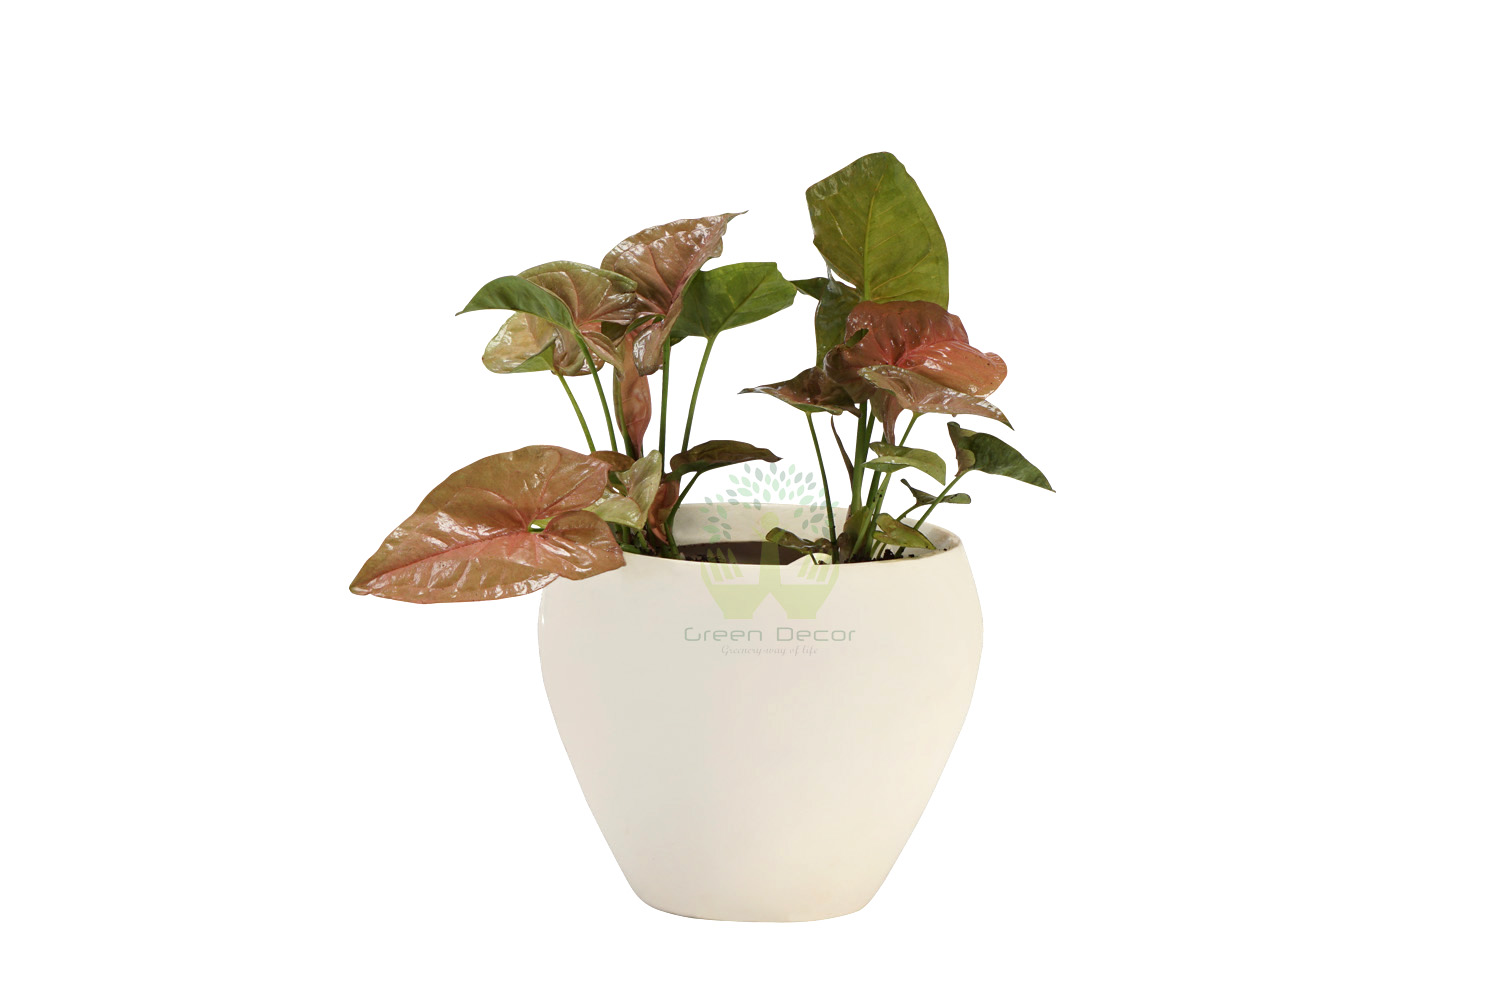 Buy Syngonium Pink Plants , White Pots and seeds in Delhi NCR by the best online nursery shop Greendecor.